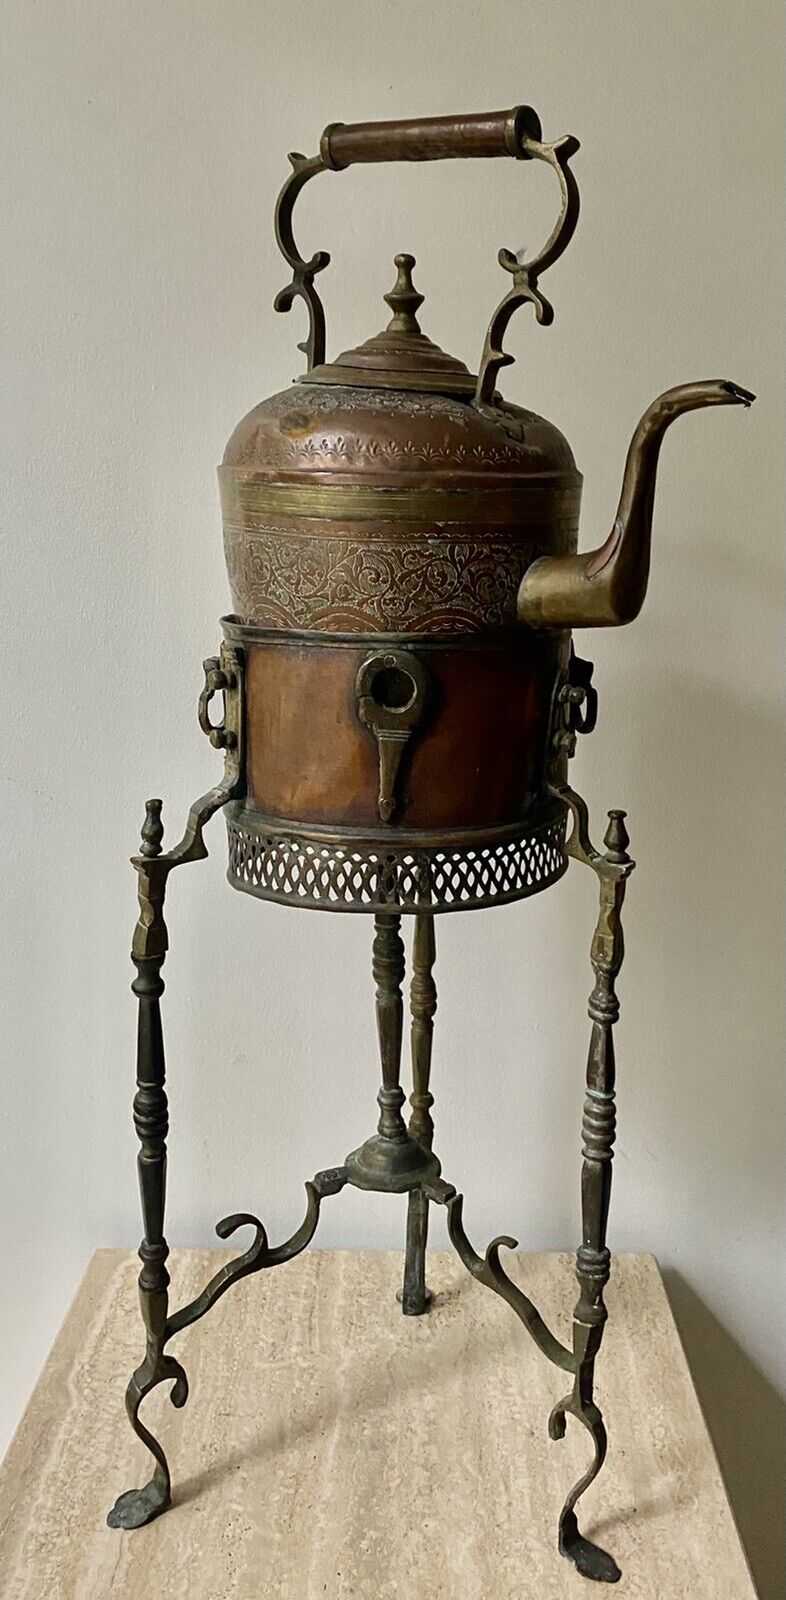 ANTIQUE TURKISH MIDDLE EASTERN HAND HAMMERED COPPER BRASS TEA KETTLE ON STAND